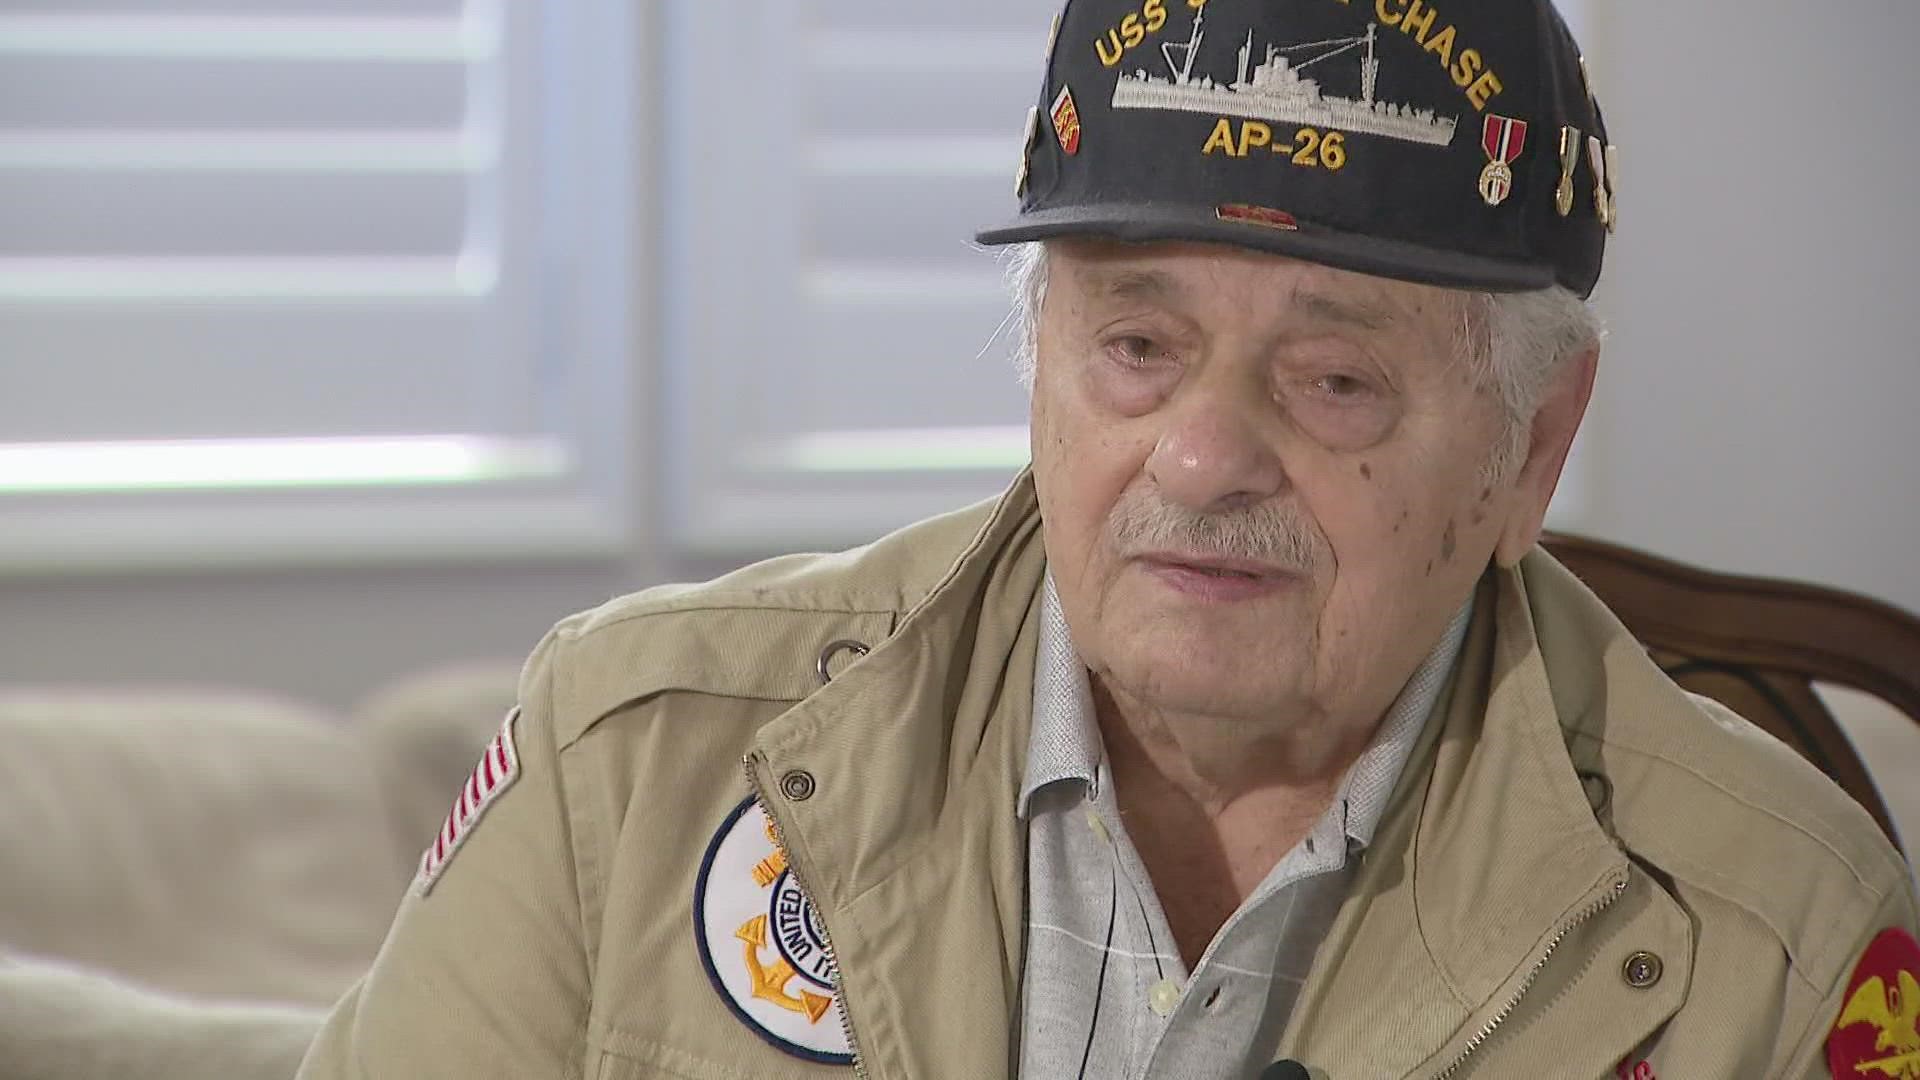 Frank made 15 trips to Omaha Beach in a small craft during the D-Day invasion, ferrying soldiers and returning to his Navy Transport Ship with the wounded or dead.